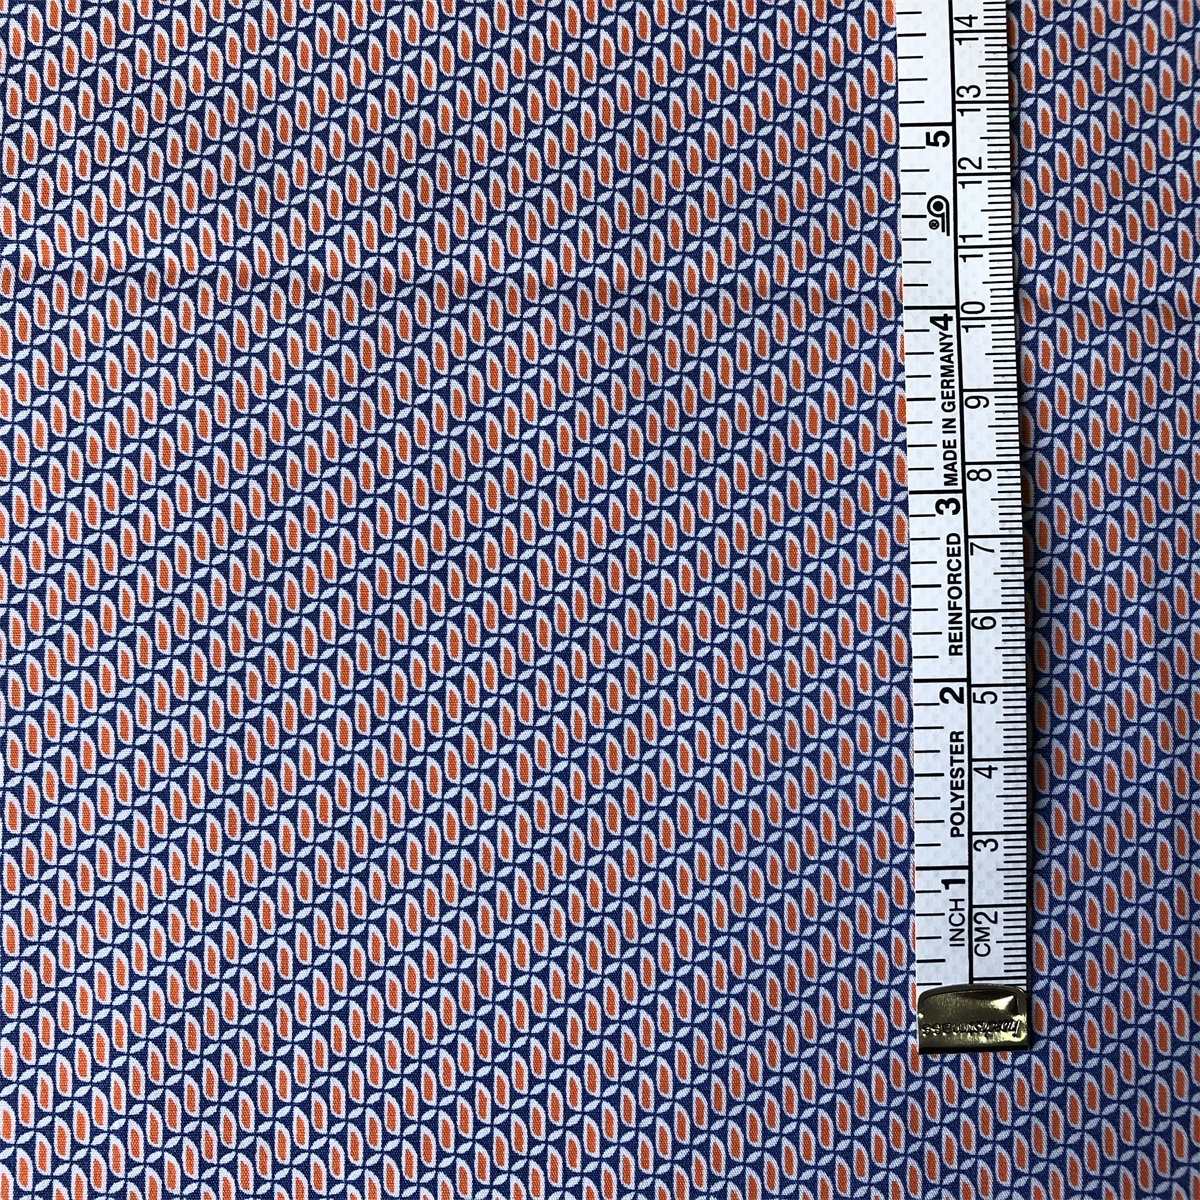 Sun-rising Textile Cotton Printed fabric new fashionable pattern 100%cotton poplin printed fabric for men's casual shirts